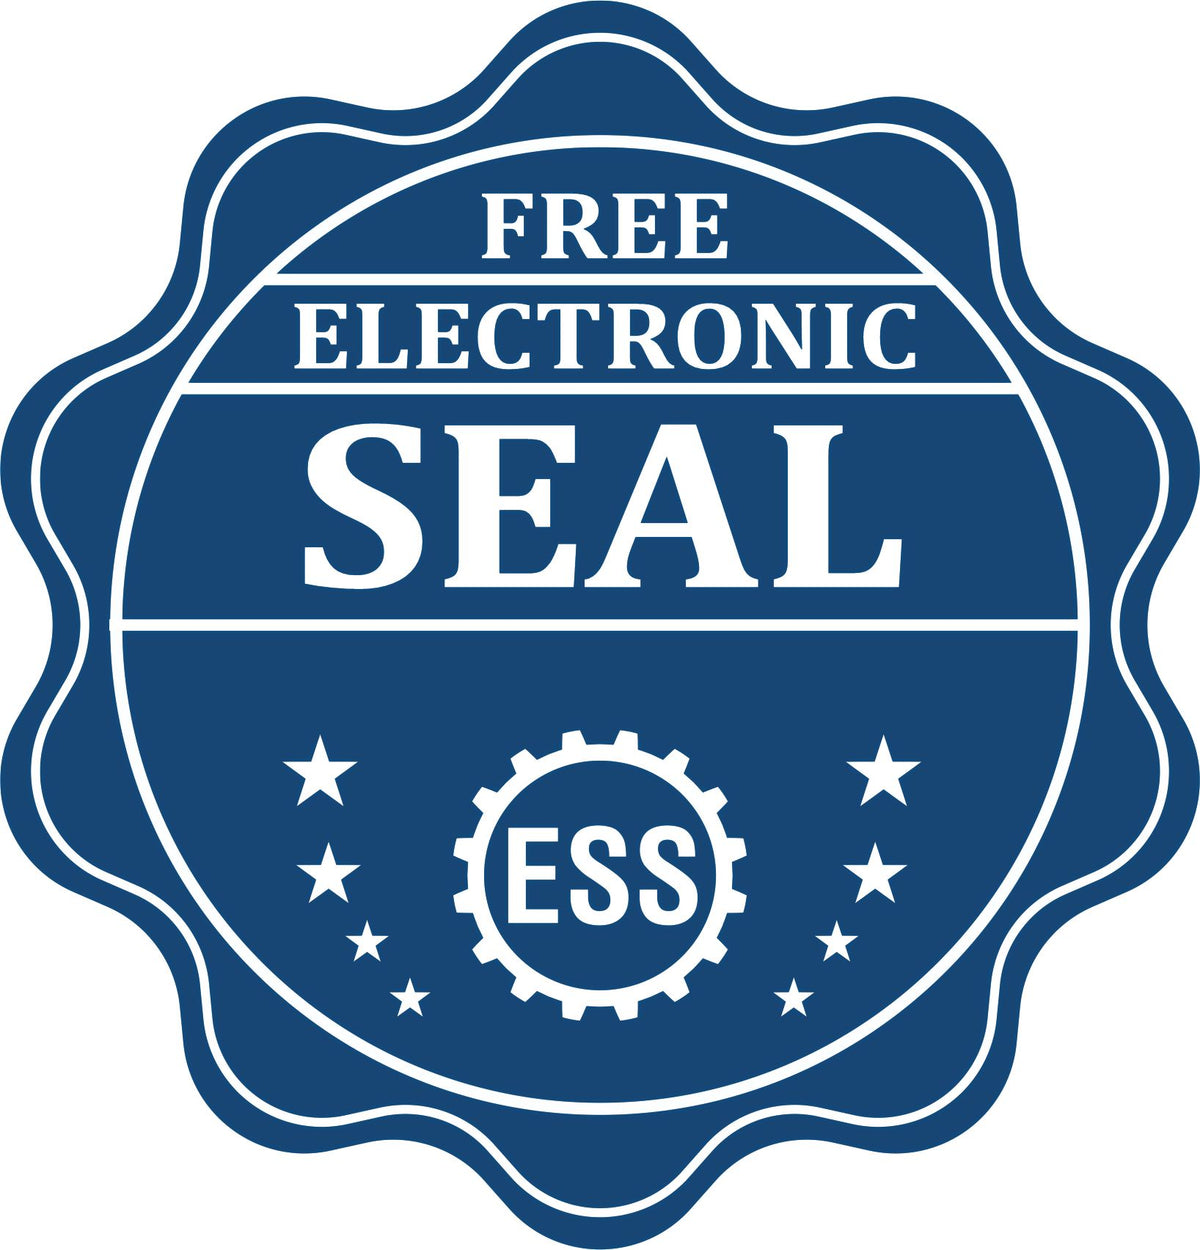 A badge showing a free electronic seal for the Gift Vermont Landscape Architect Seal with stars and the ESS gear on the emblem.